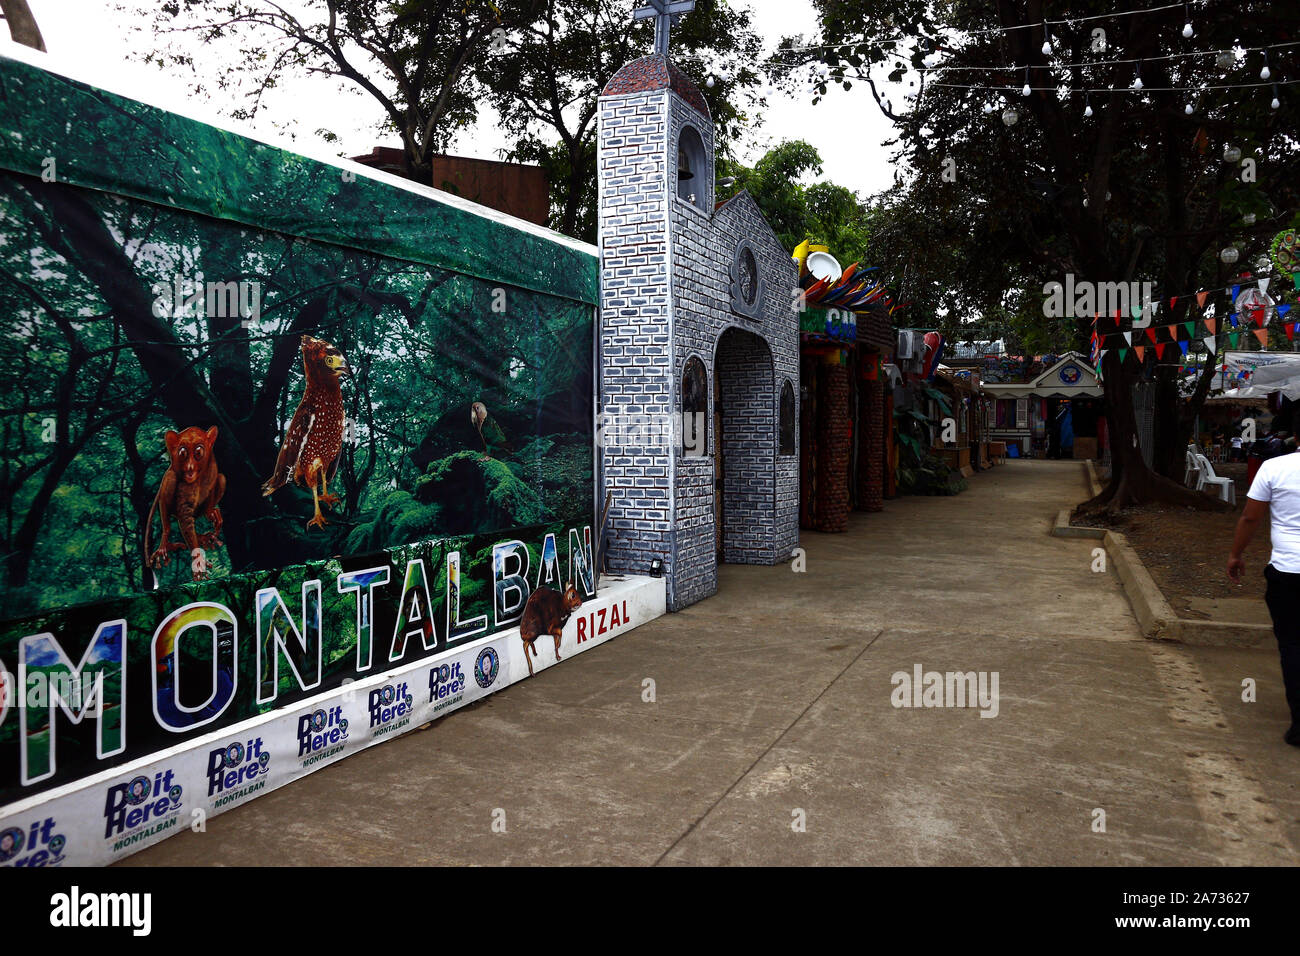 ANTIPOLO CITY, PHILIPPINES – OCTOBER 28, 2019: Facade of display booths of several municipalities of Rizal province inside the provincial capitol grou Stock Photo